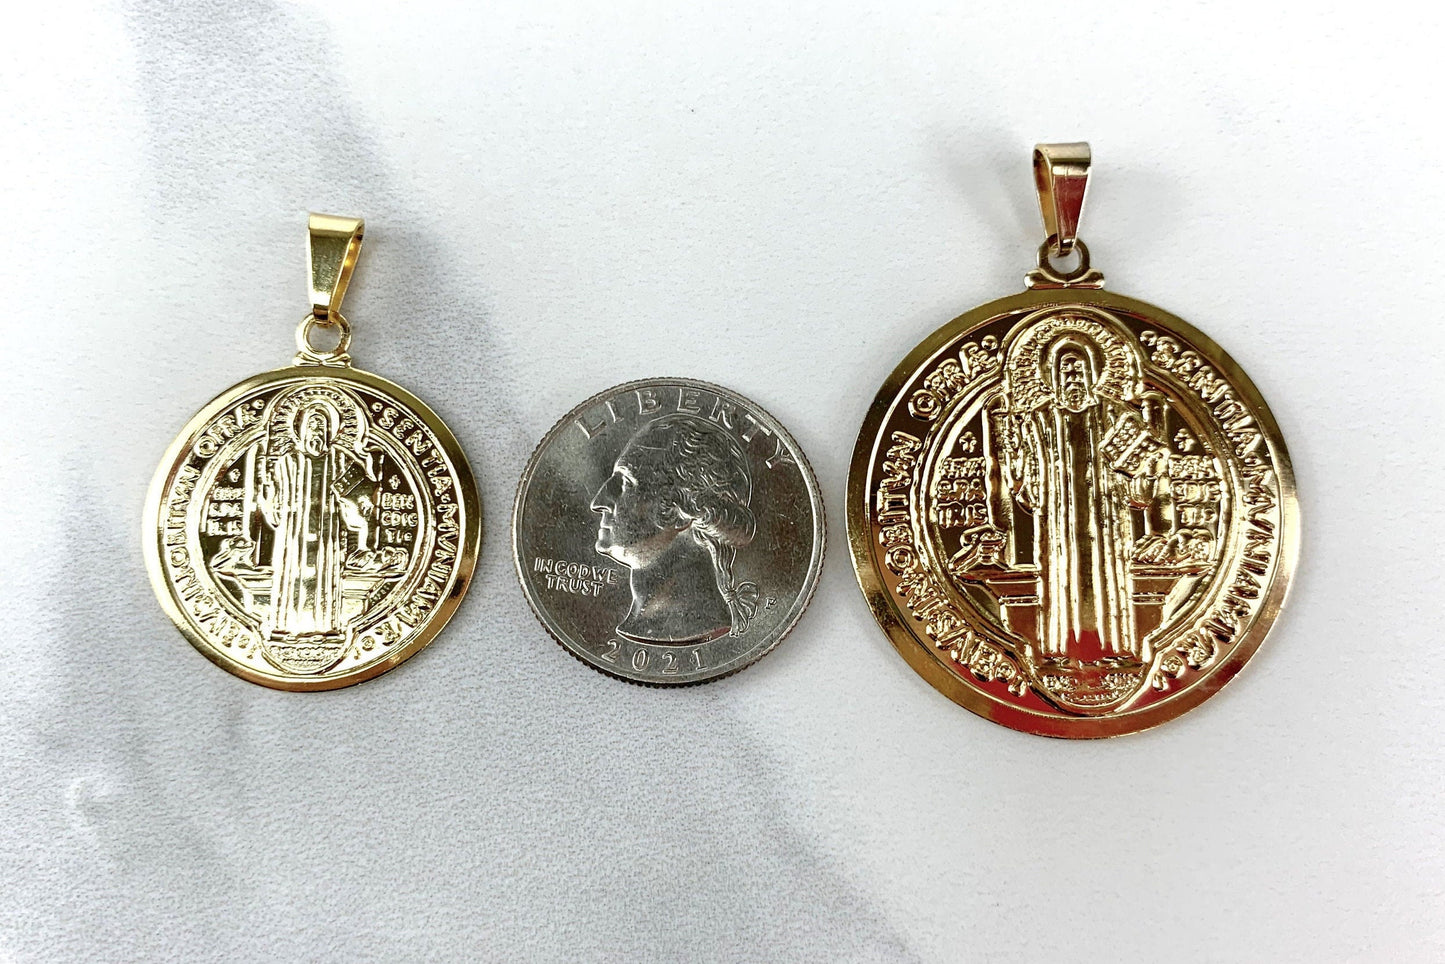 18k Gold Filled San Benito Coin, 2 Sided Round Pendant Charms, Reversible San Benito, Catholic Jewelry, for Wholesale and Jewelry Supplies